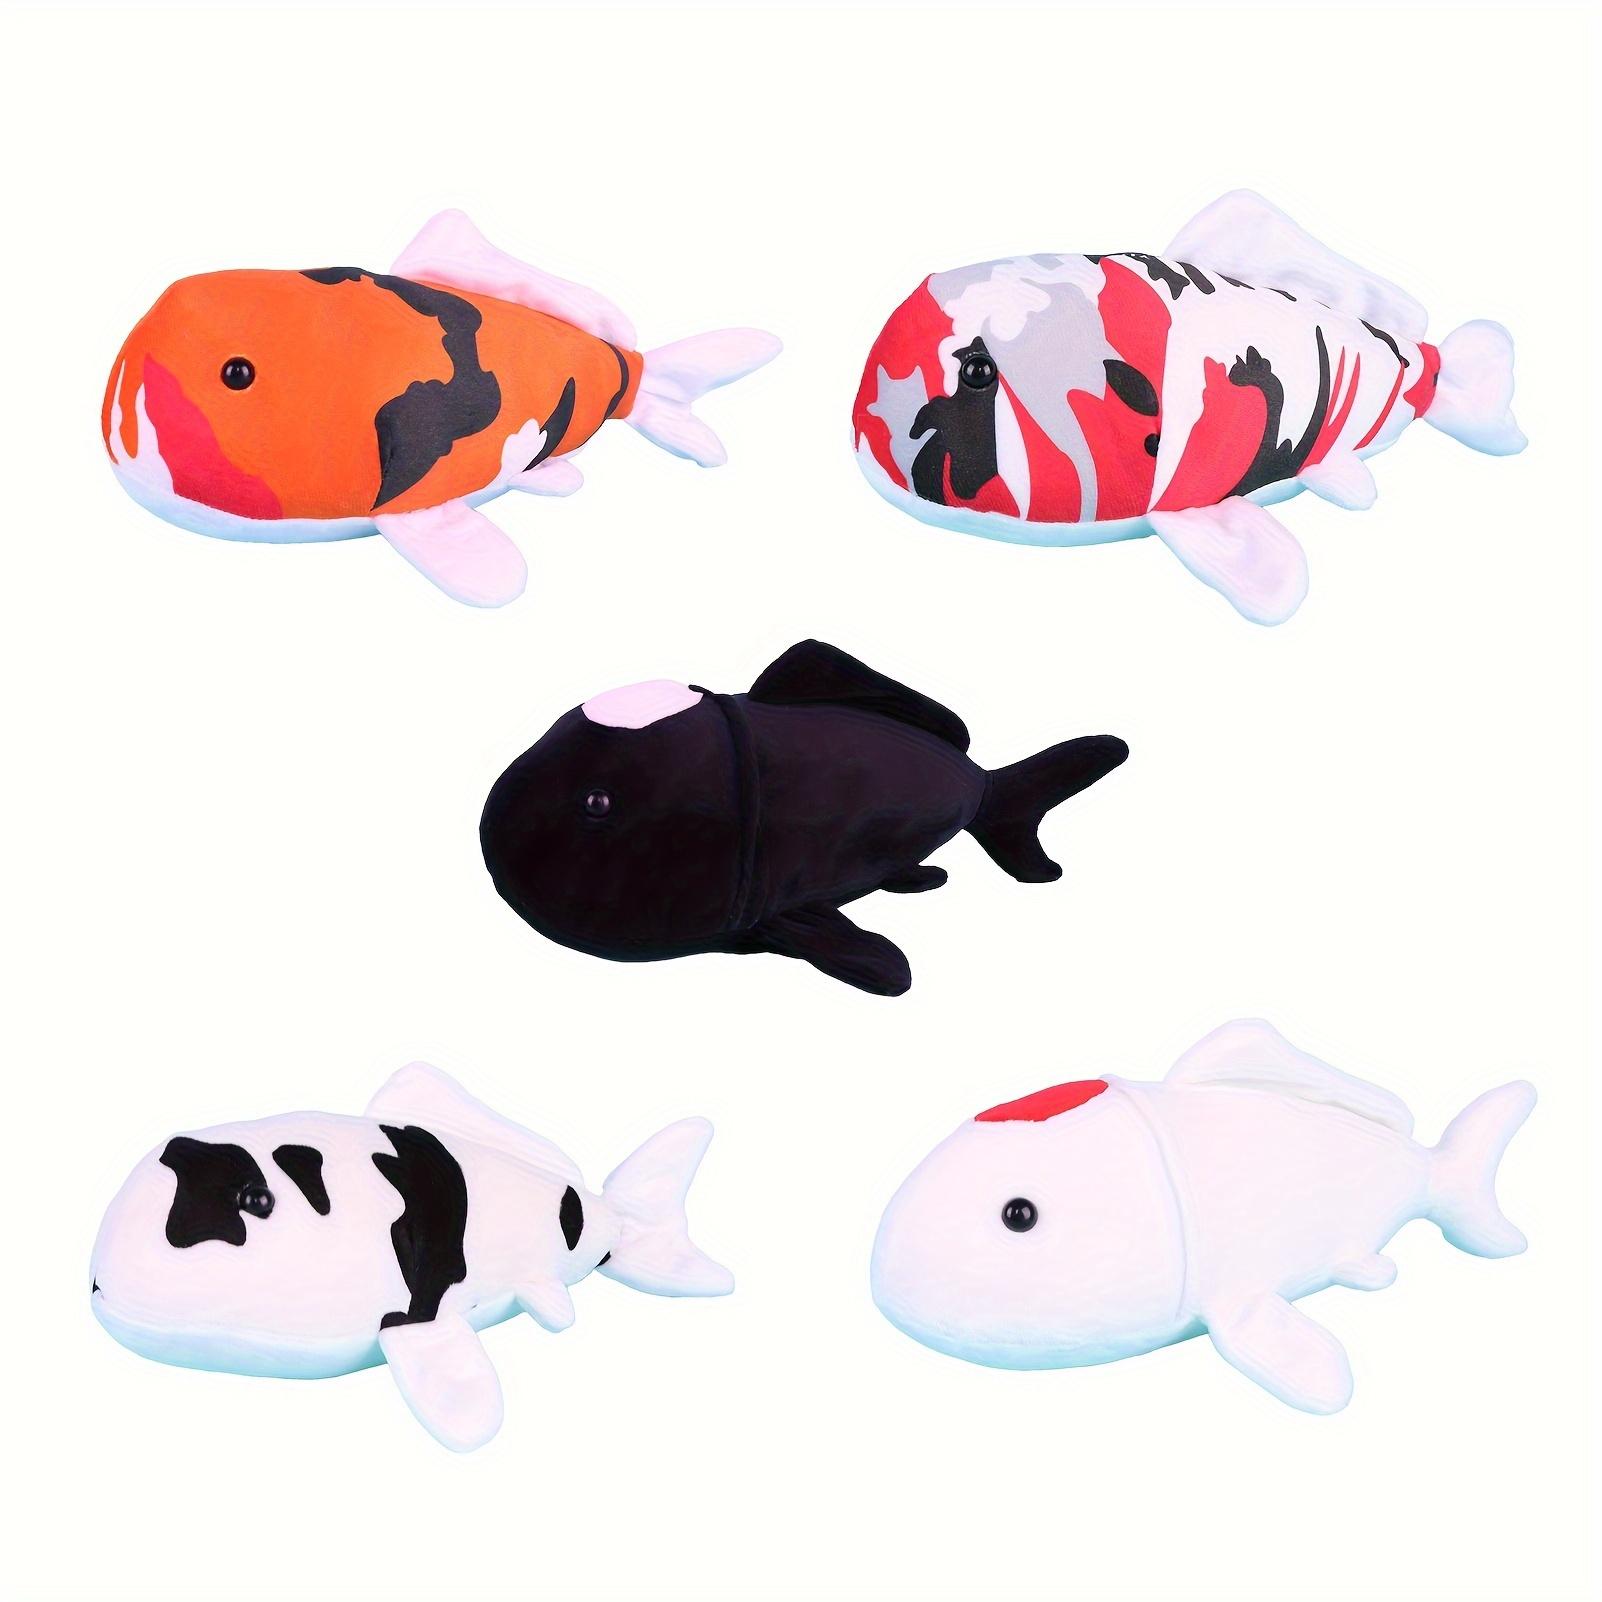 Fish Figurines Miniature Fish Figures Fake Fish Models Hand Painted Animal  Figurine Ornament for Micro Landscape Party Favors Cake Topper,Set of 7